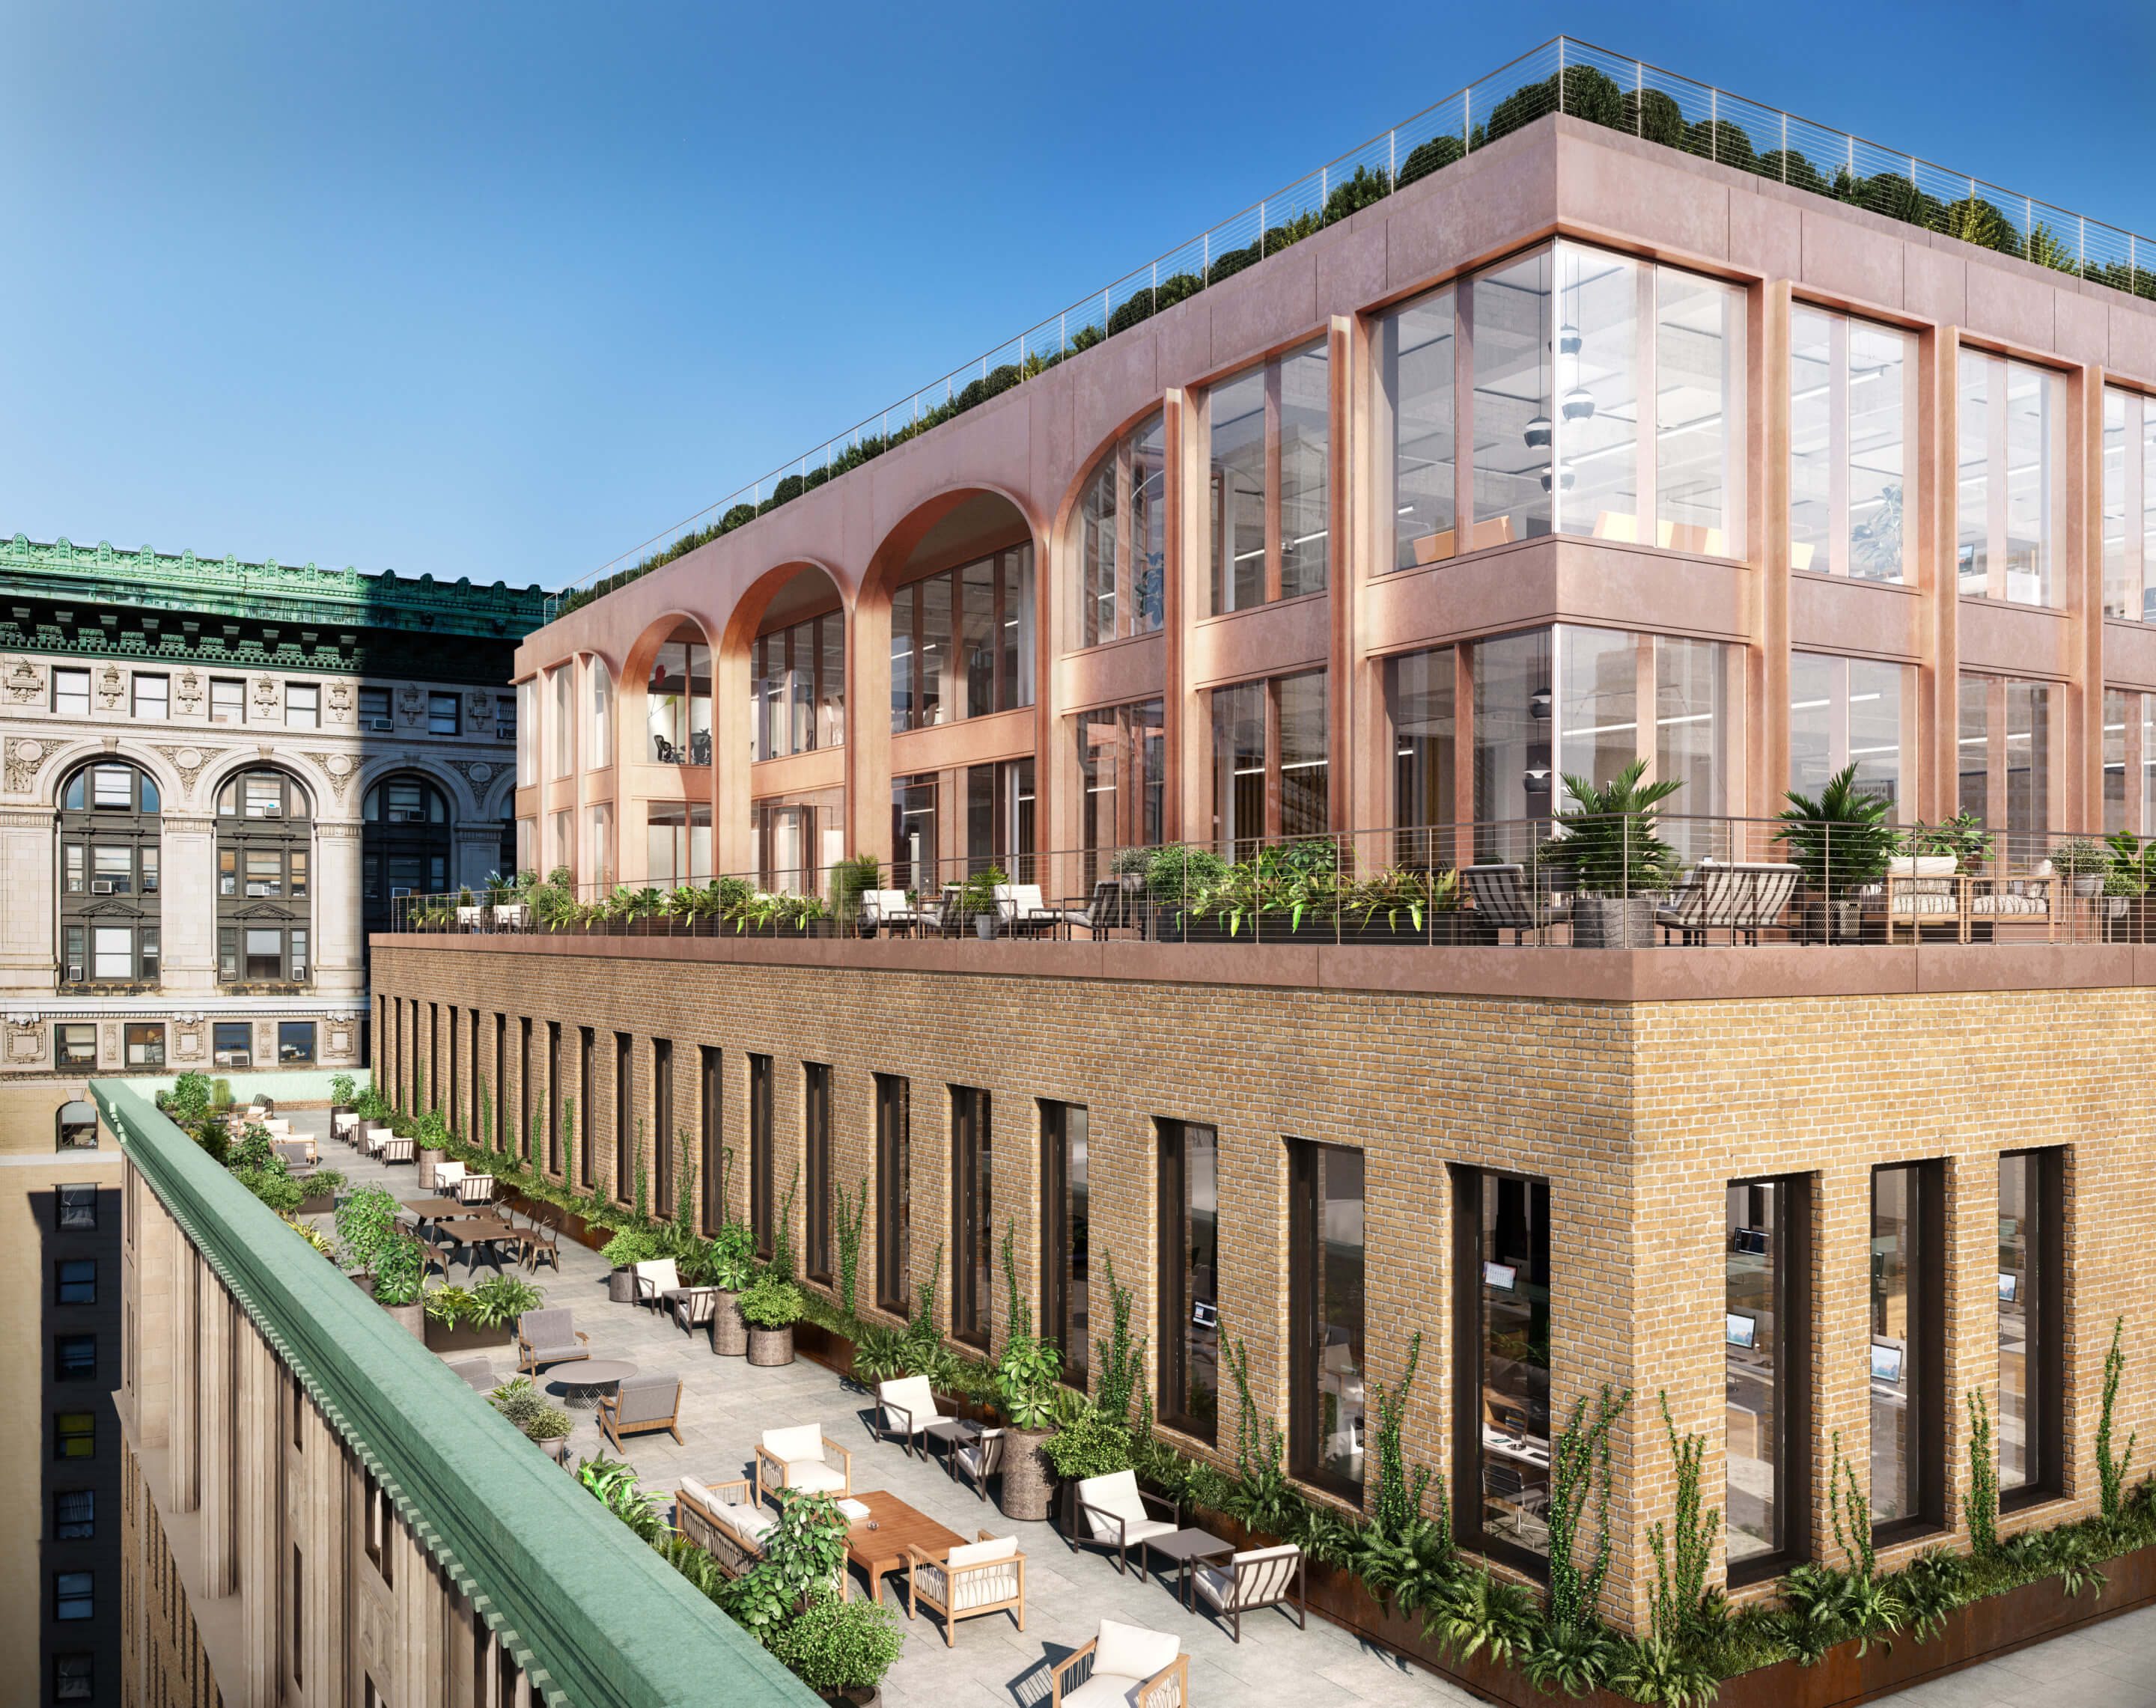 Rendering of a new penthouse with arched windows on top of a neoclassical brick building